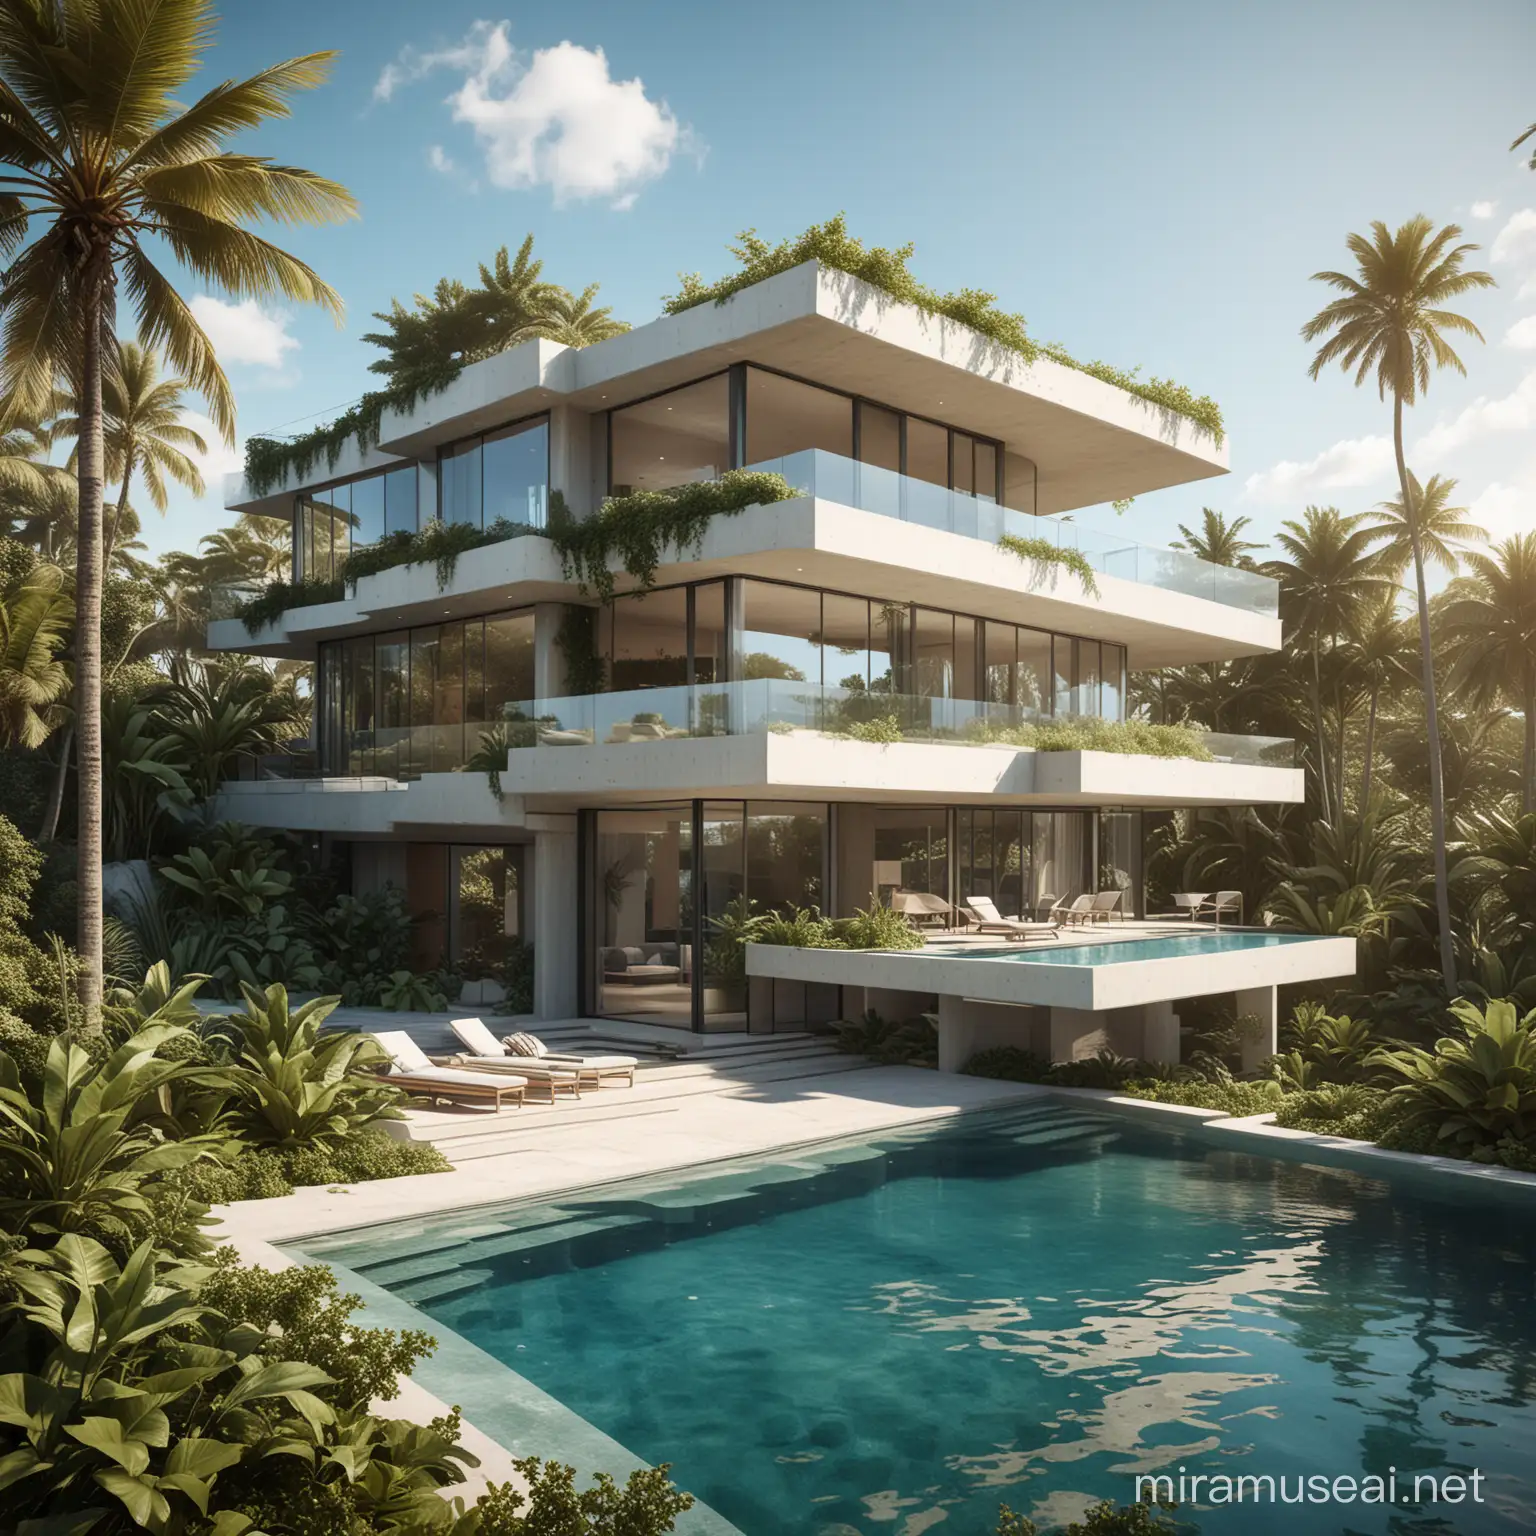 Abstract Architectural Oasis ThreeStory Building Surrounded by Sea and Greenery